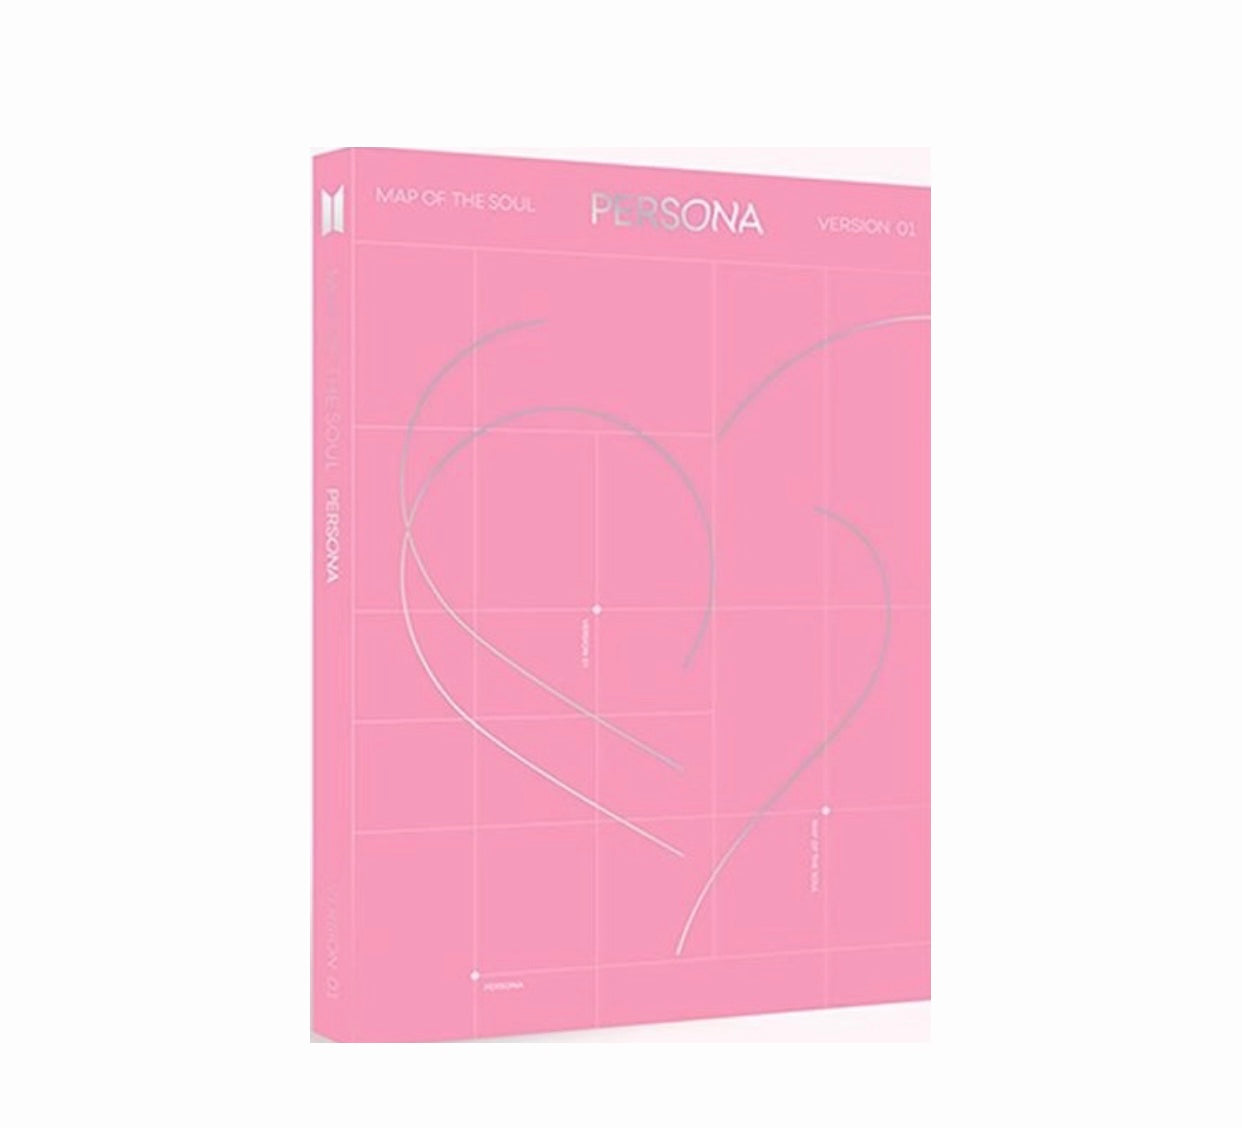 BTS - Map of the Soul: Persona version 01